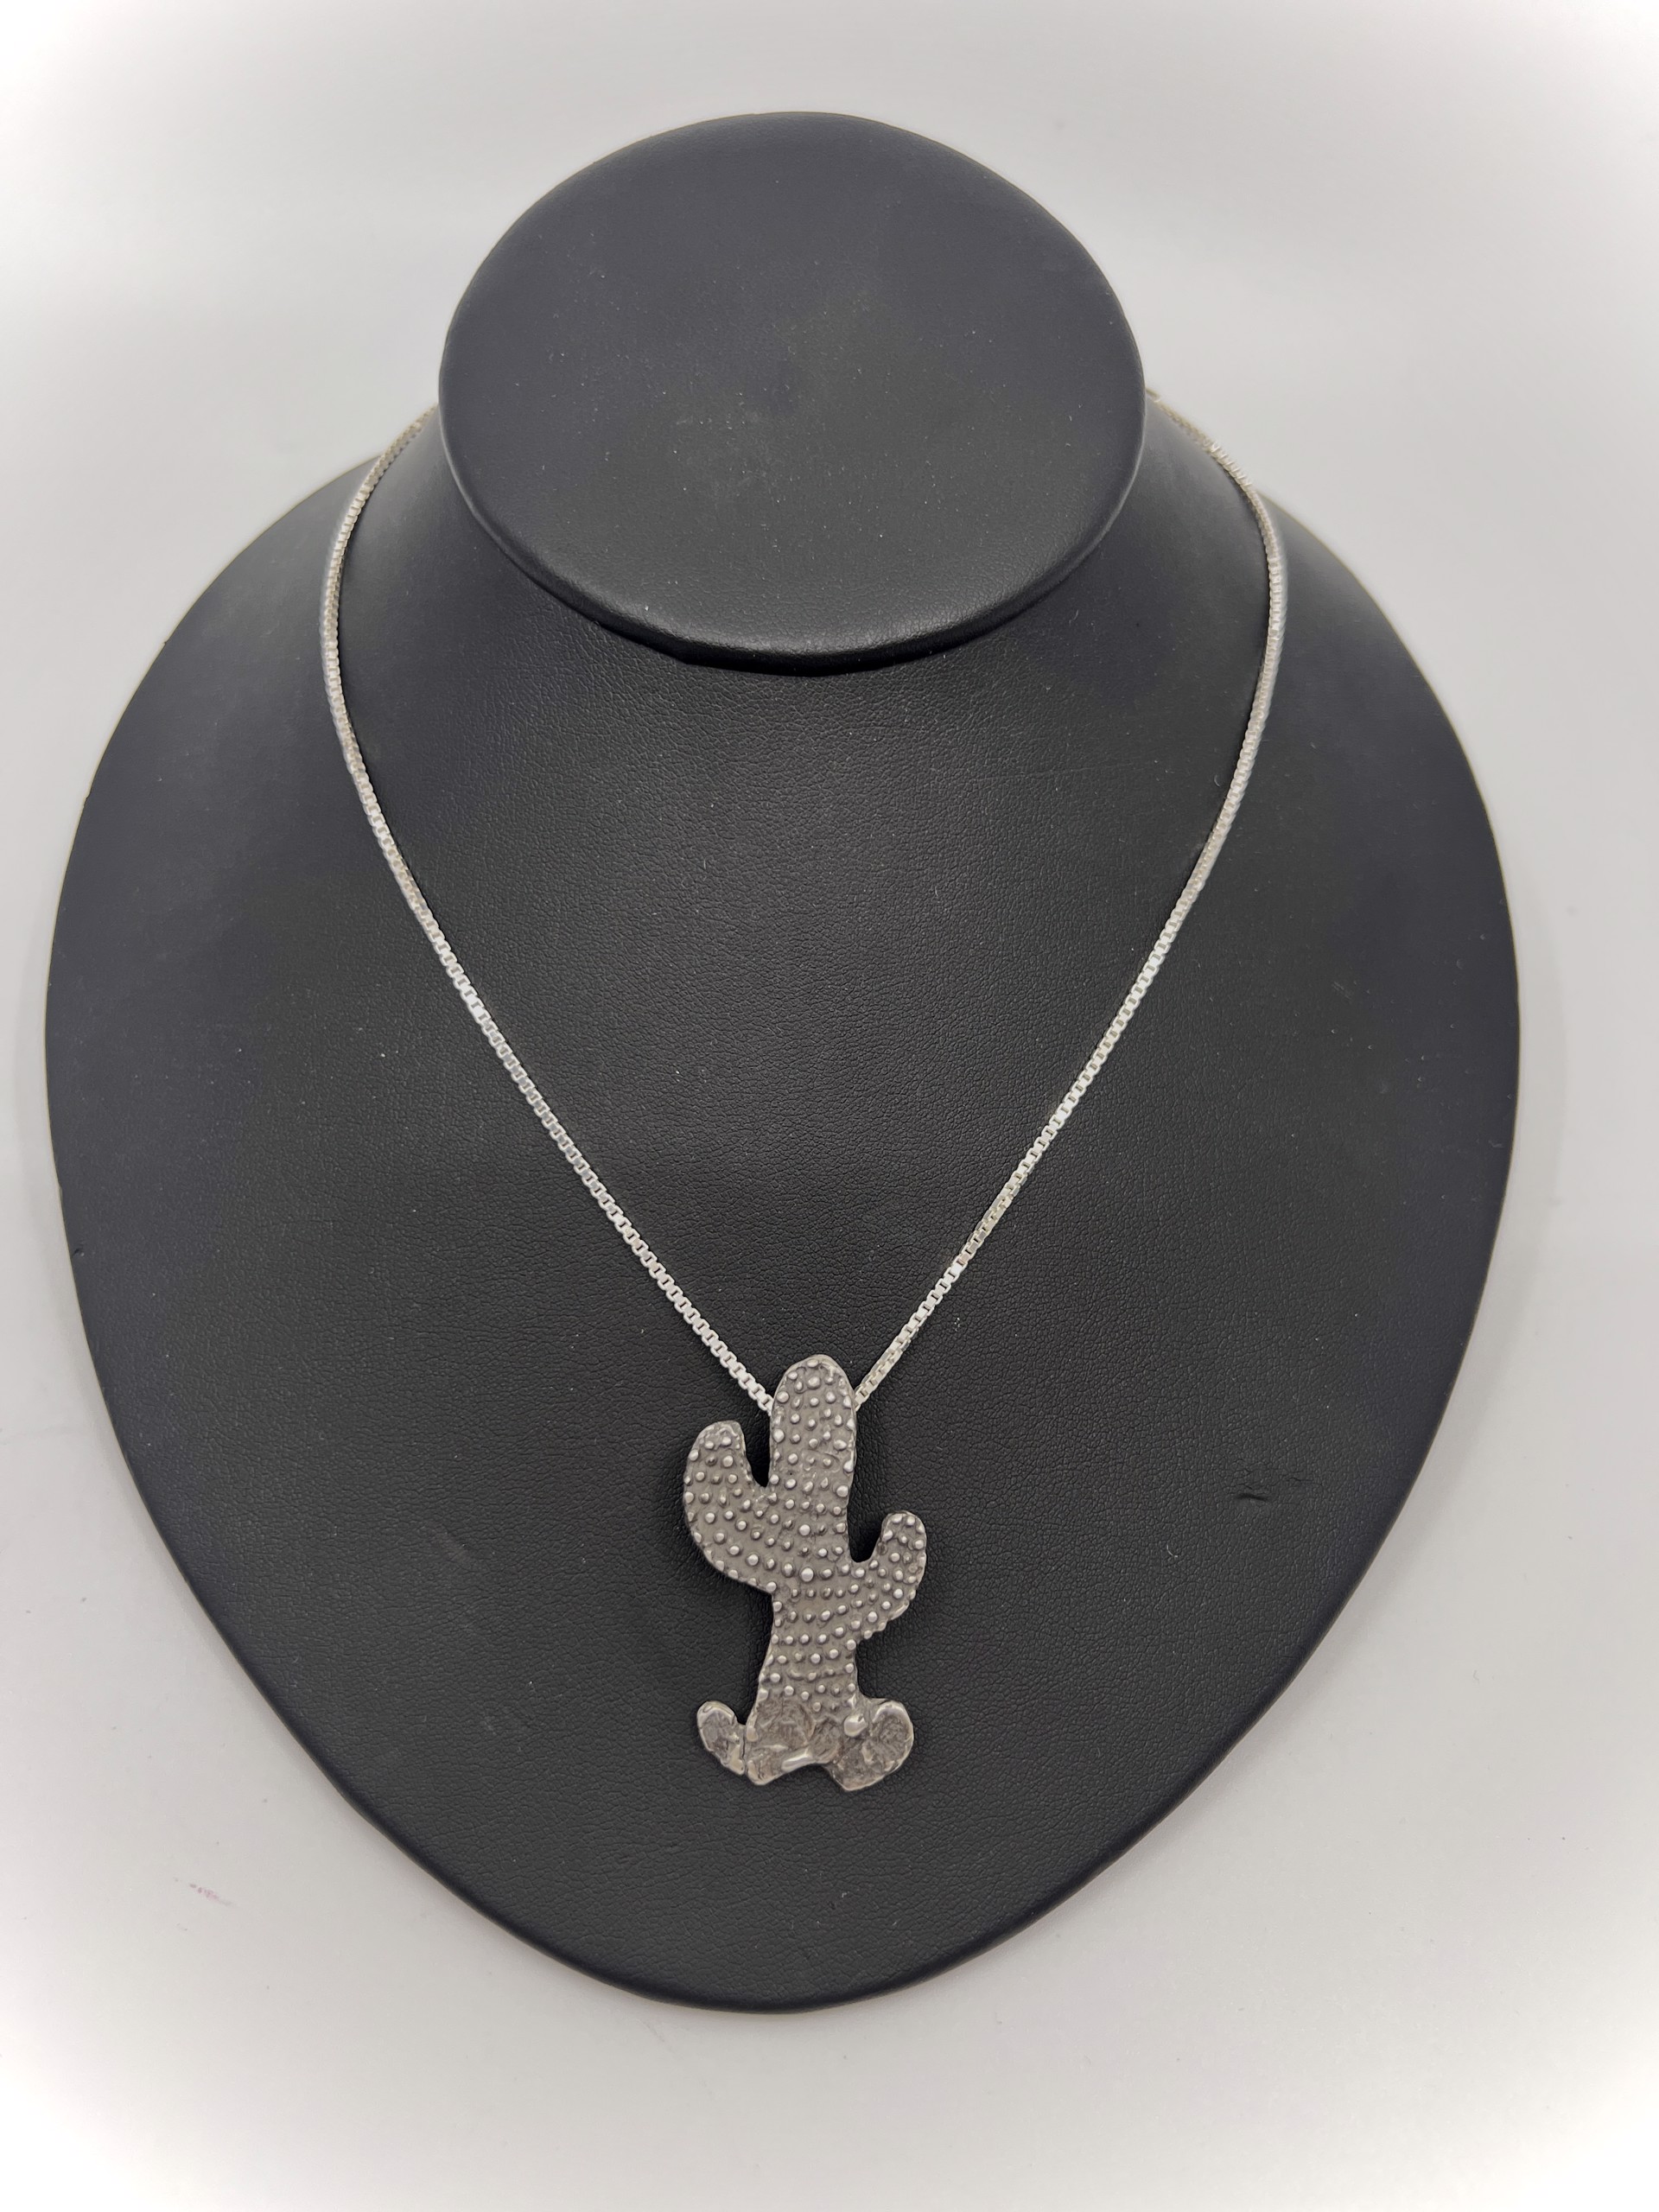 Granulated Cactus Pendant on Sterling Silver Box Chain by Beth Benowich